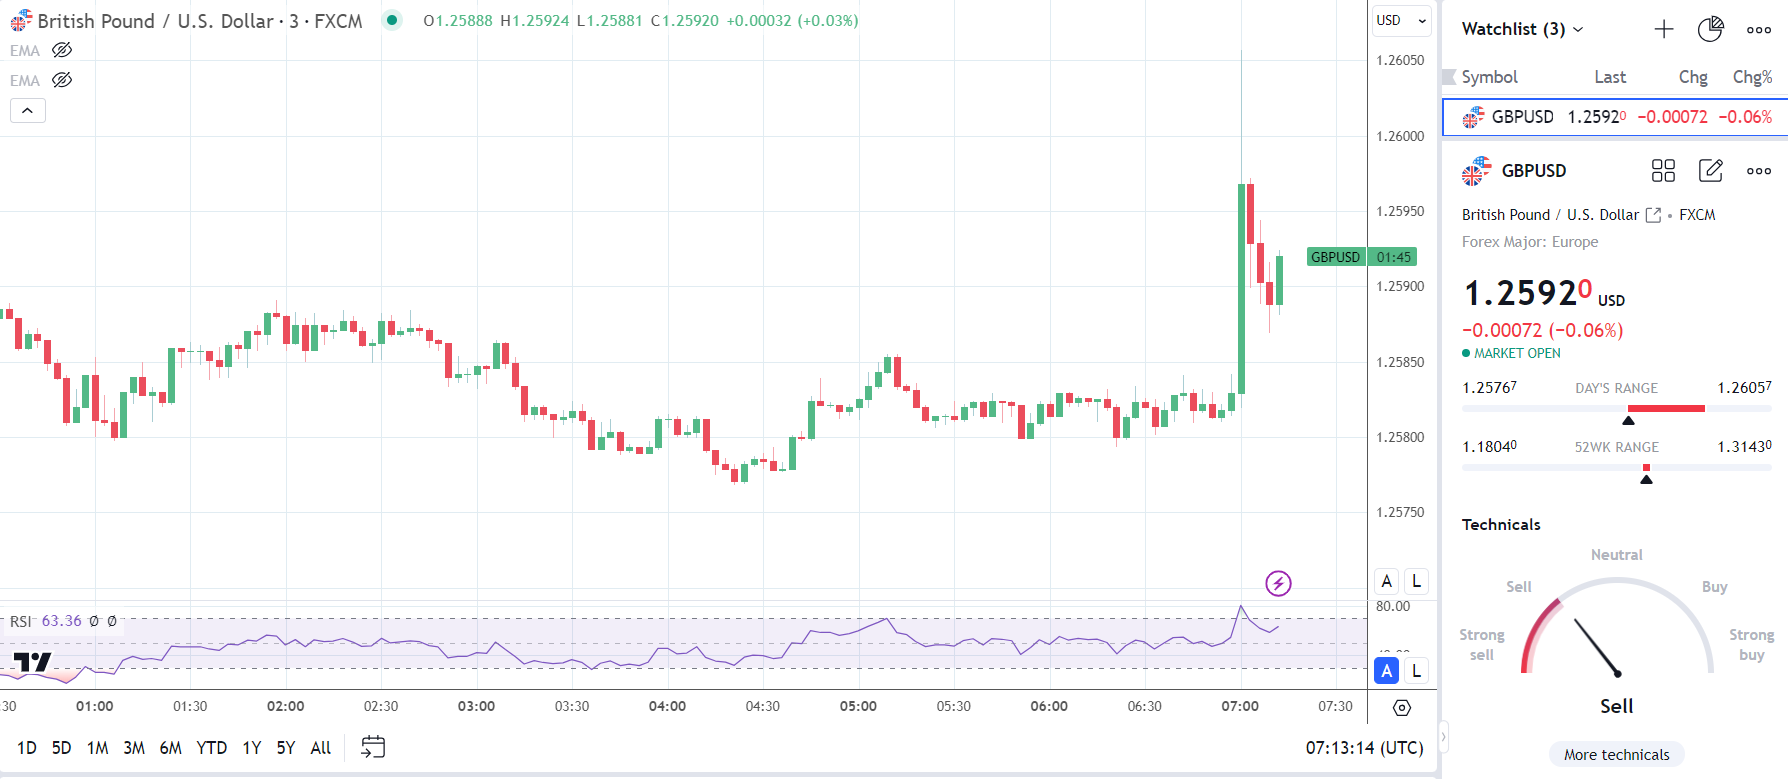 GBP/USD reacts to UK retail sales report